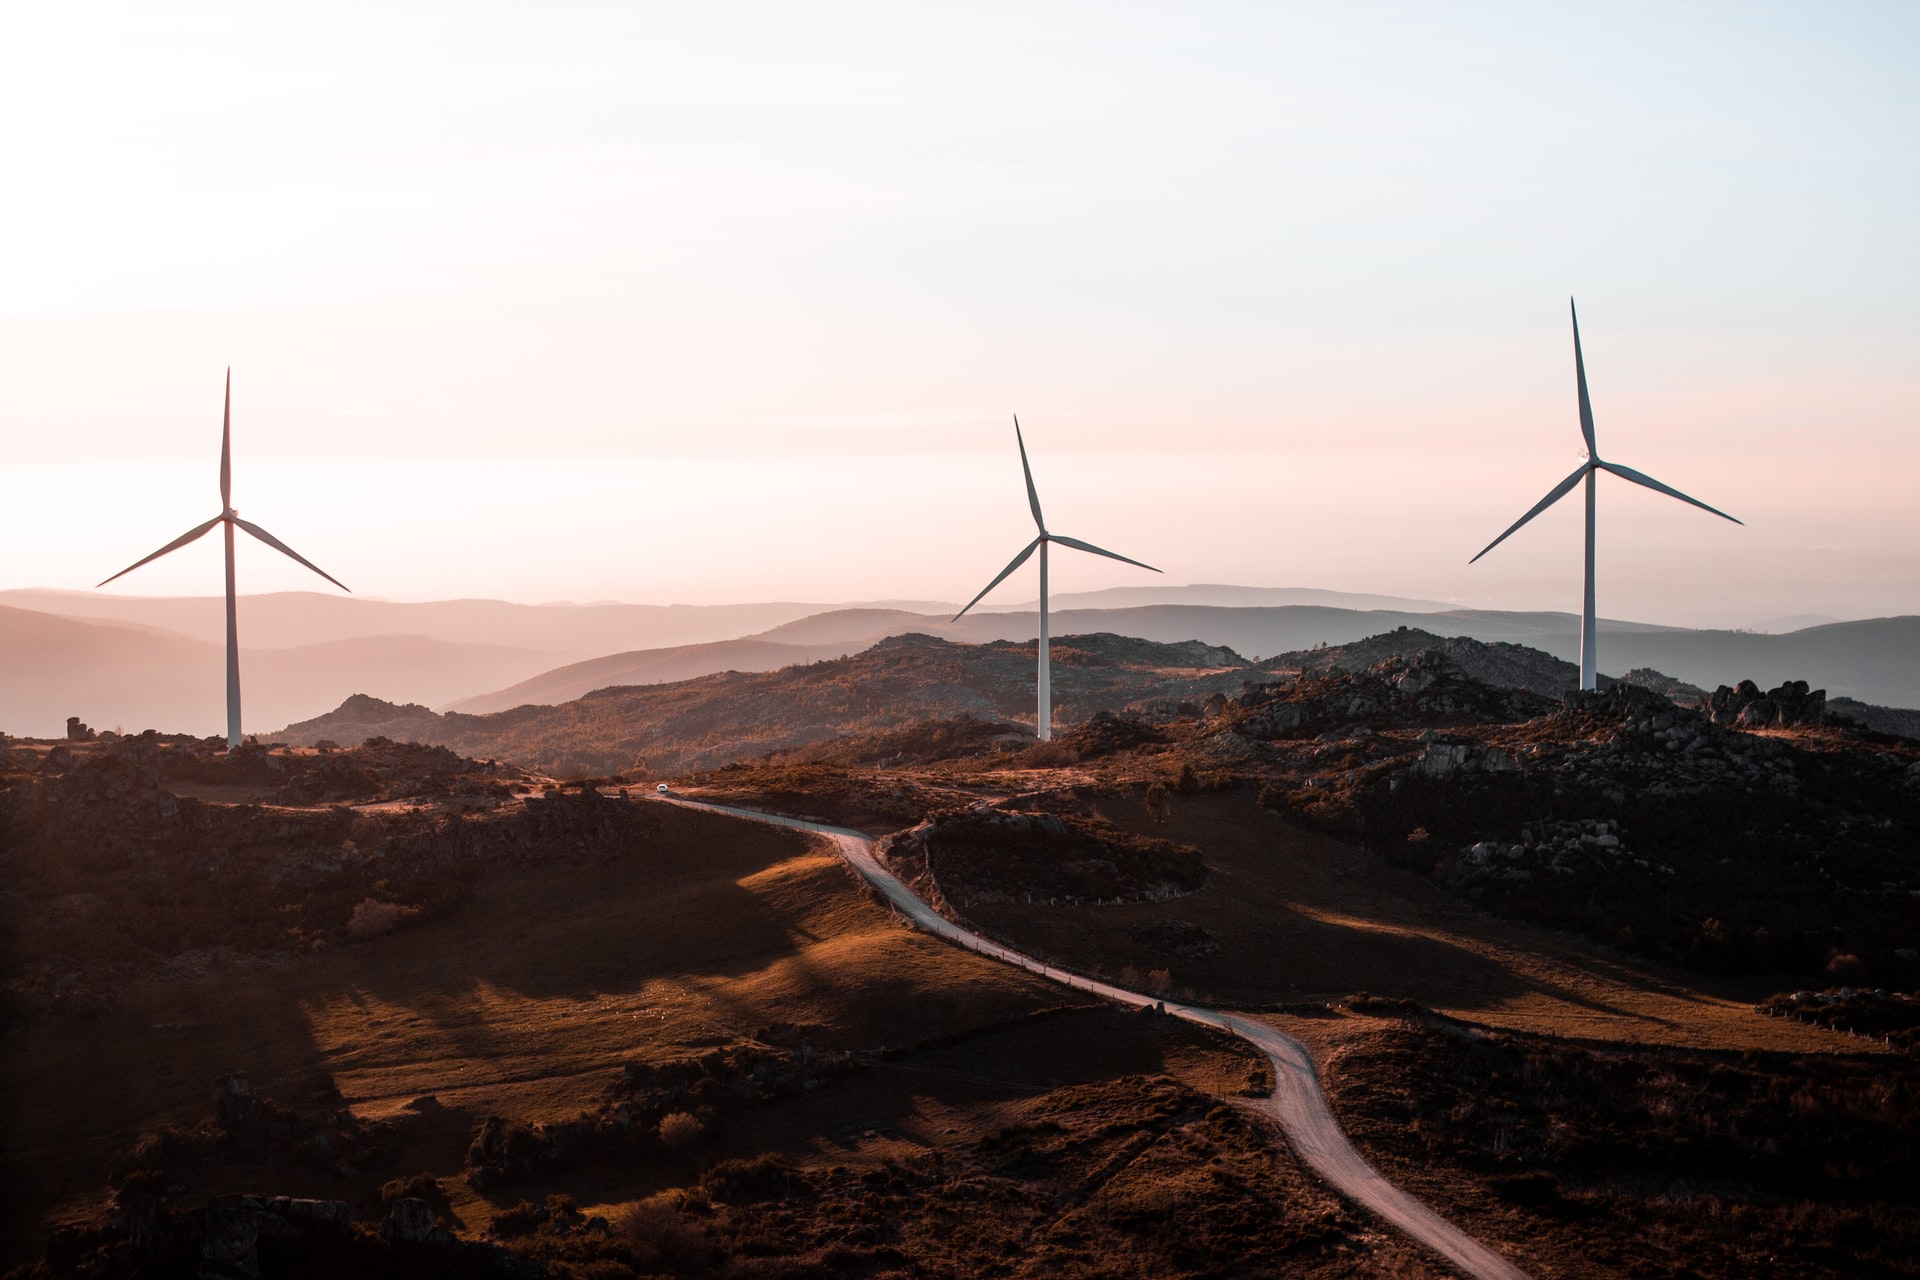 Greentech in focus: Asterion buys Steag and focuses on solar, wind, hydropower energy and biomass plants. Photo: Karyatid via Unsplash